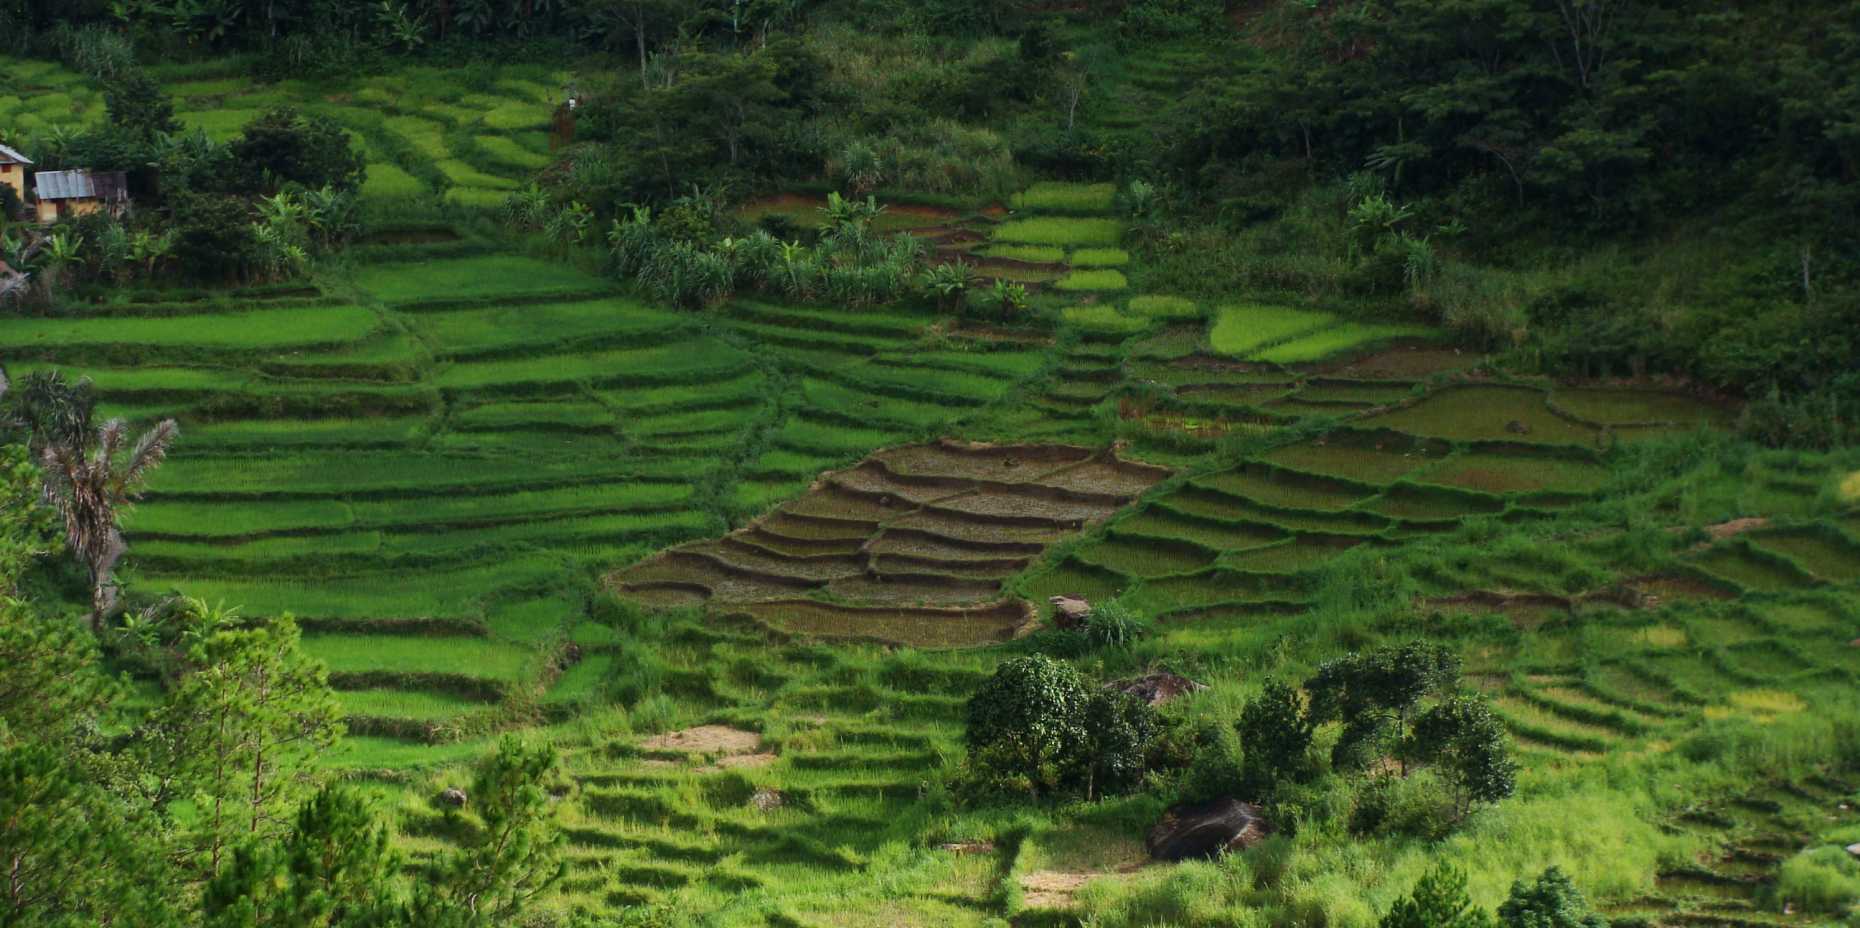 Enlarged view: small-scale rice farming in Madagascar